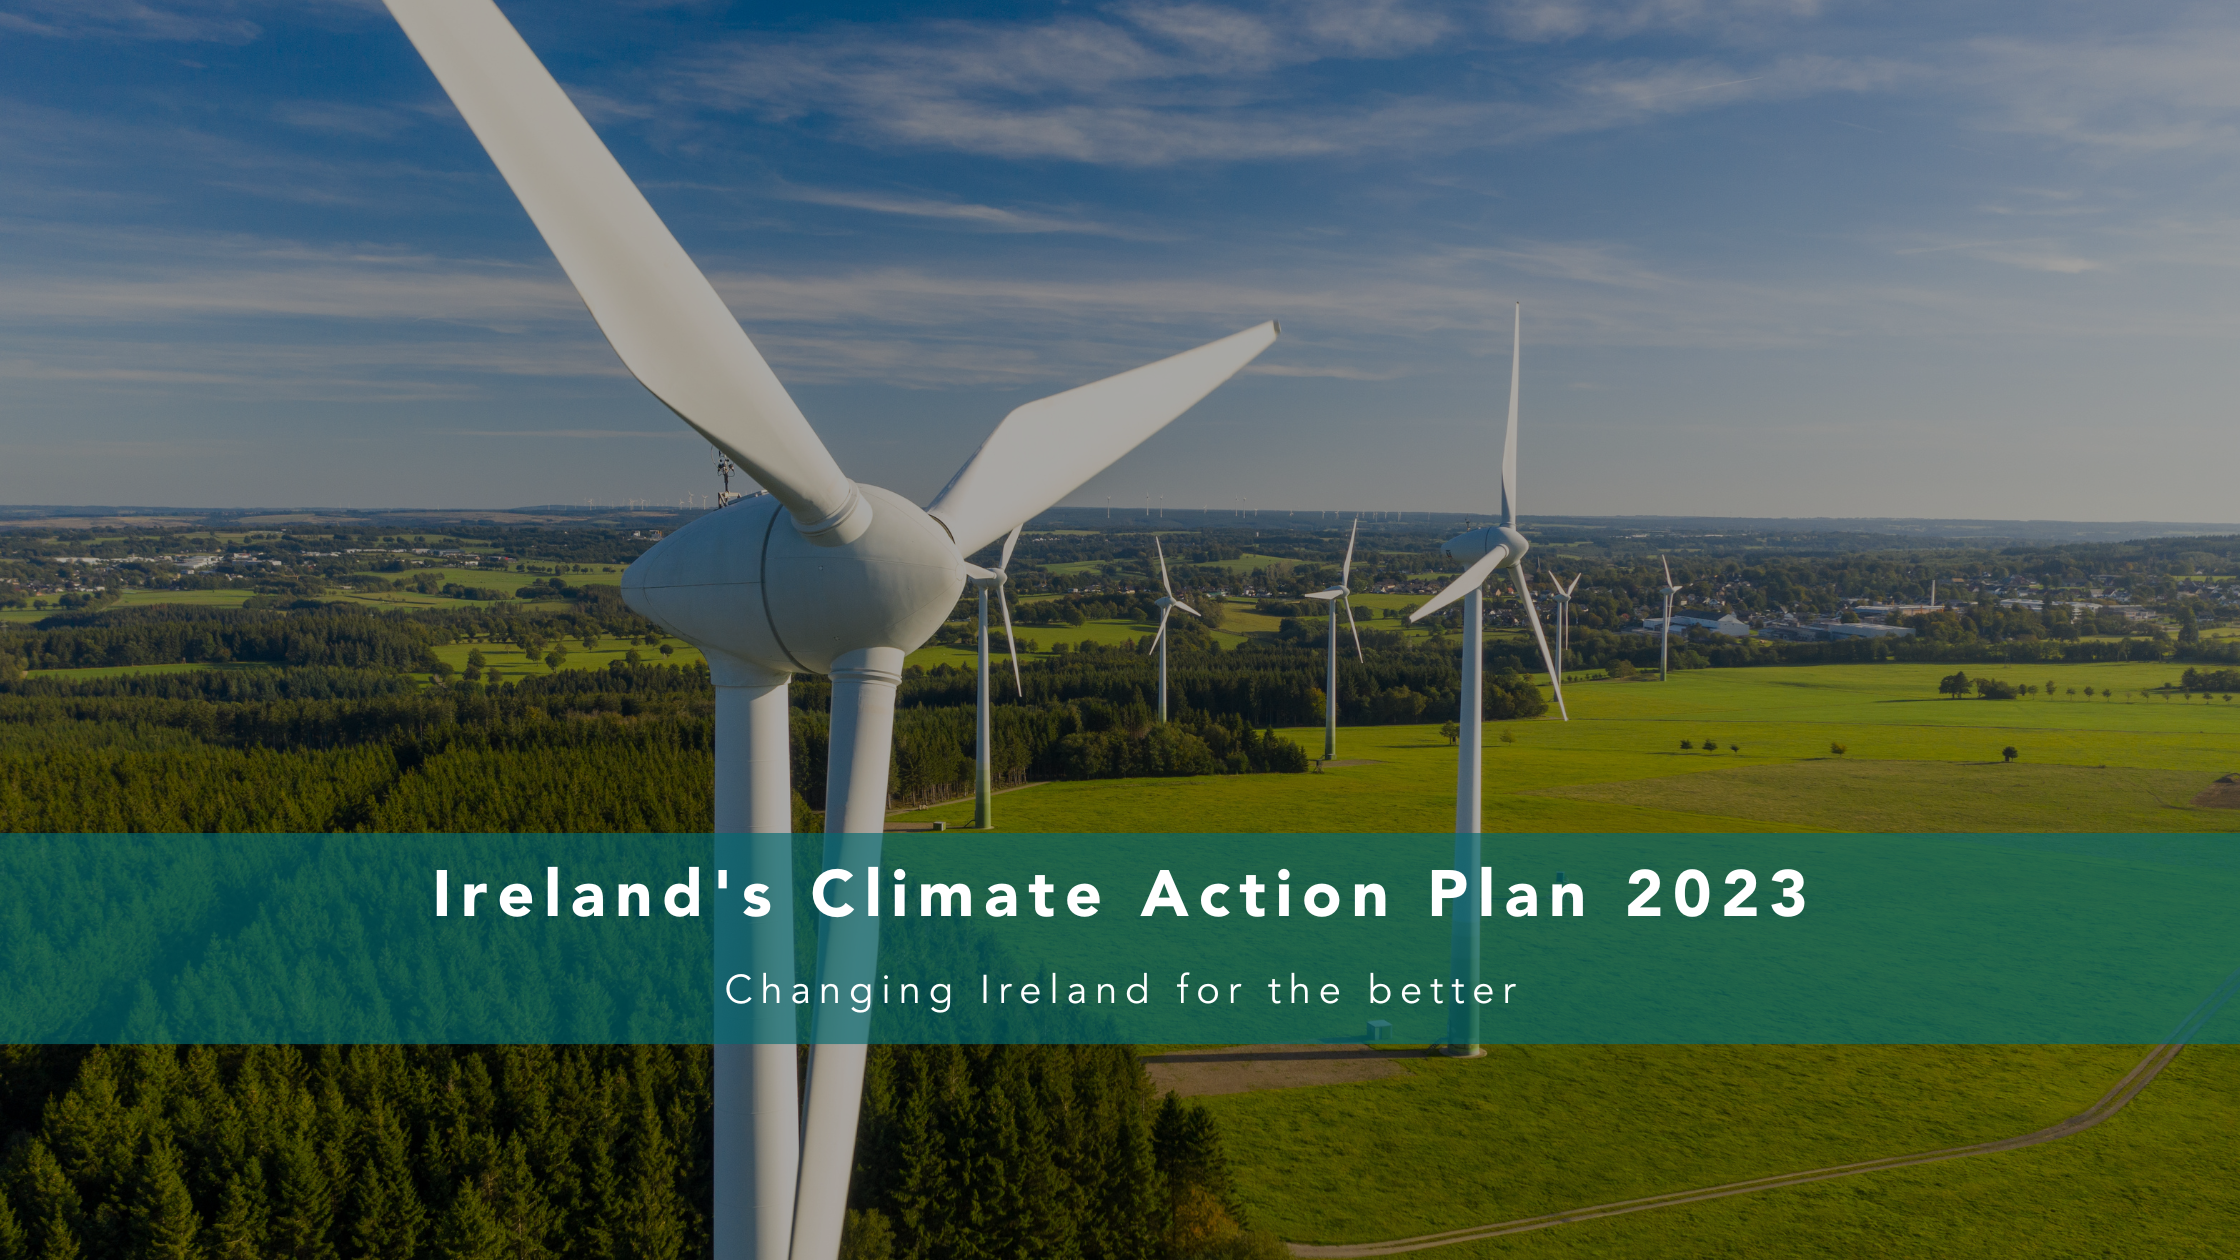 Ireland's Climate Action Plan 2023